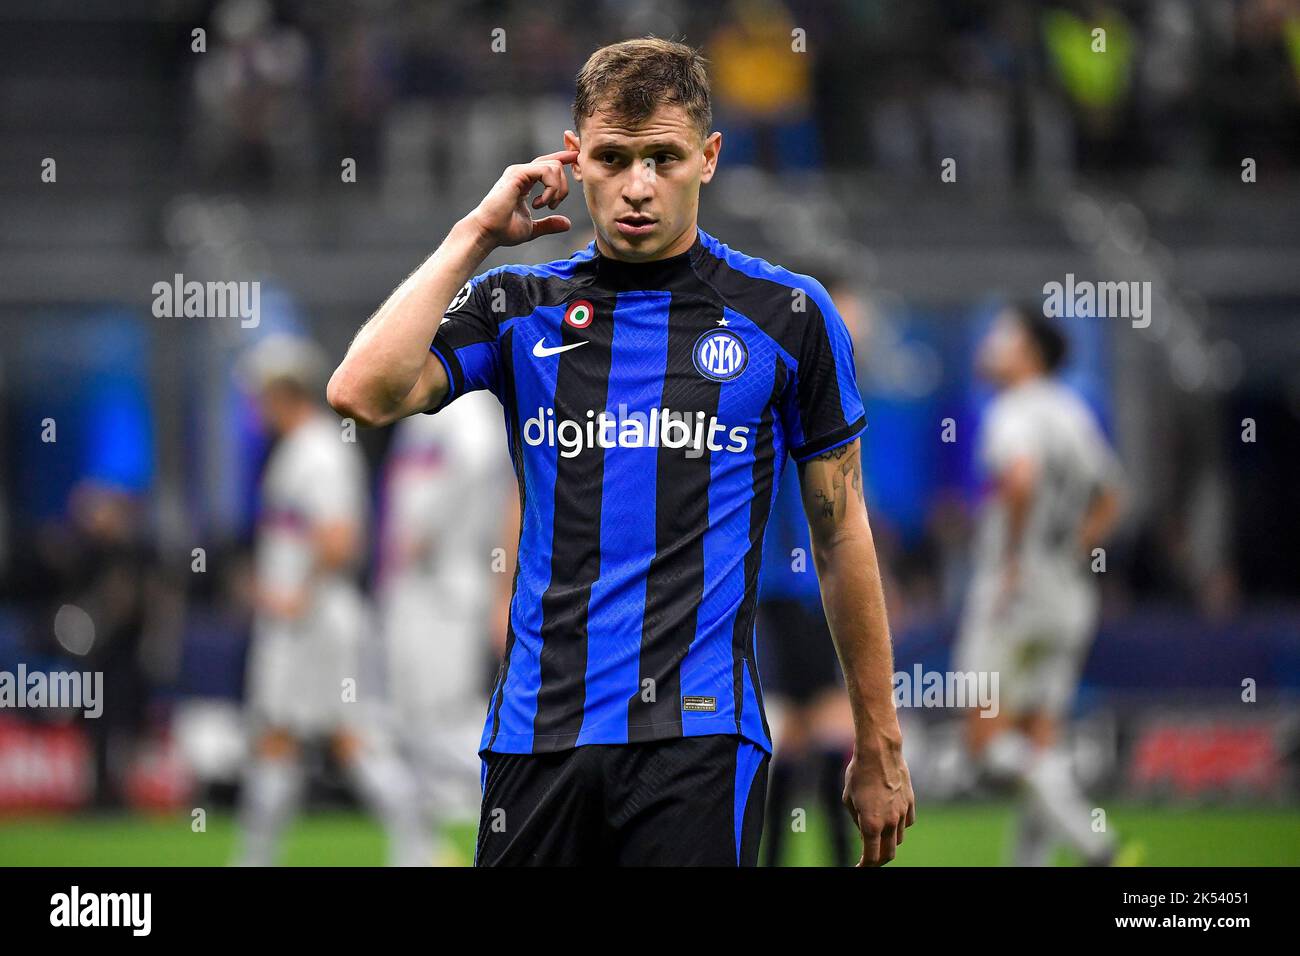 Nicolo Barella of Fc Internazionale reacts during the Champions League Group C football match between FC Internazionale and FCB Barcelona at San Siro Stock Photo